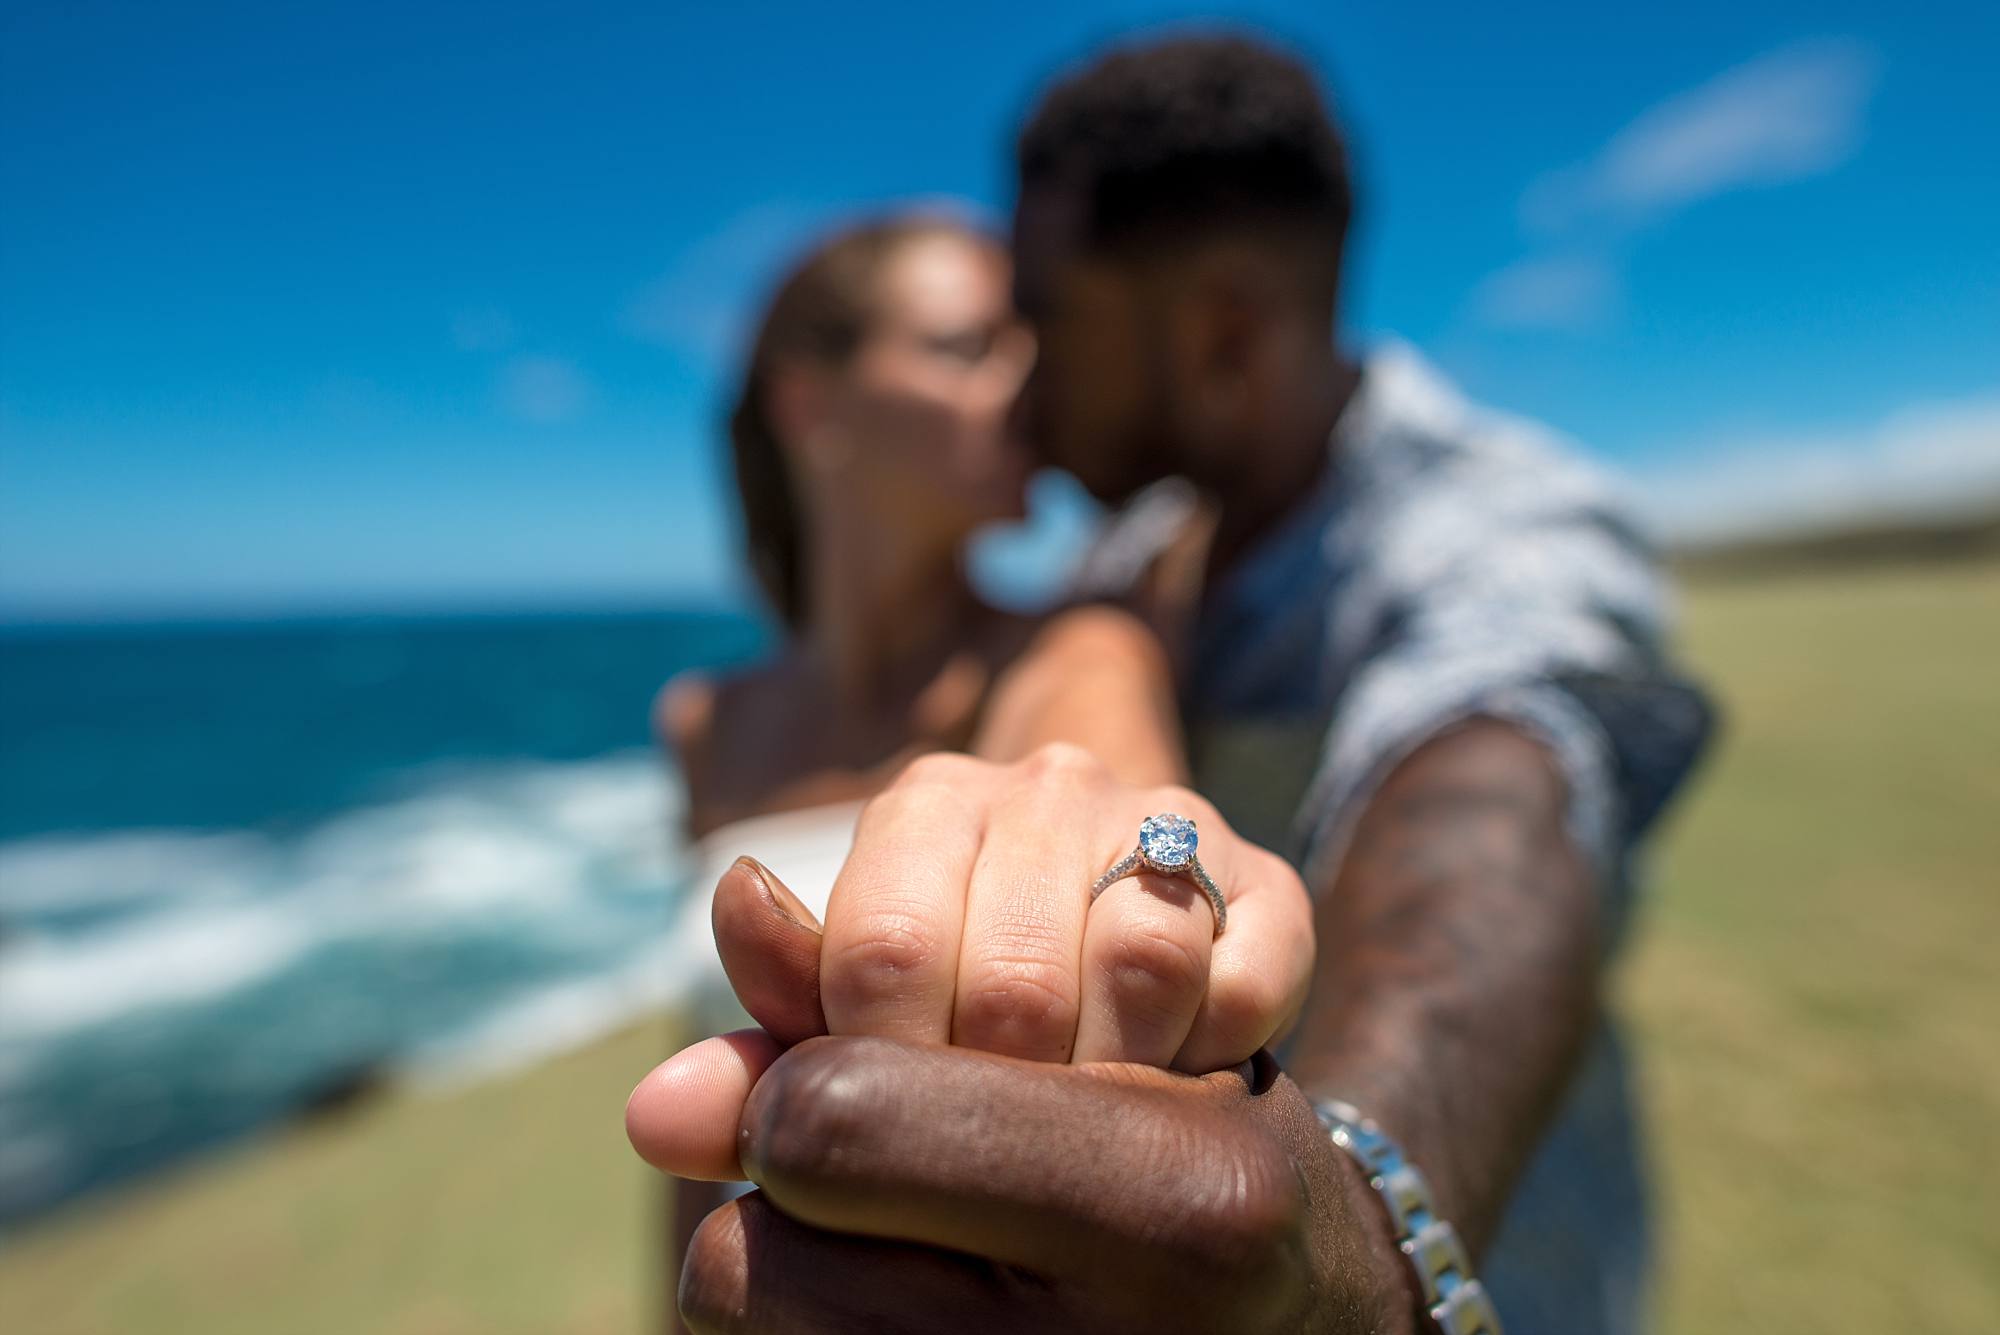 Maui-Helicopter-Proposal-with-Patriots-Wide-Receiver-Brandin-Cooks_0026.jpg